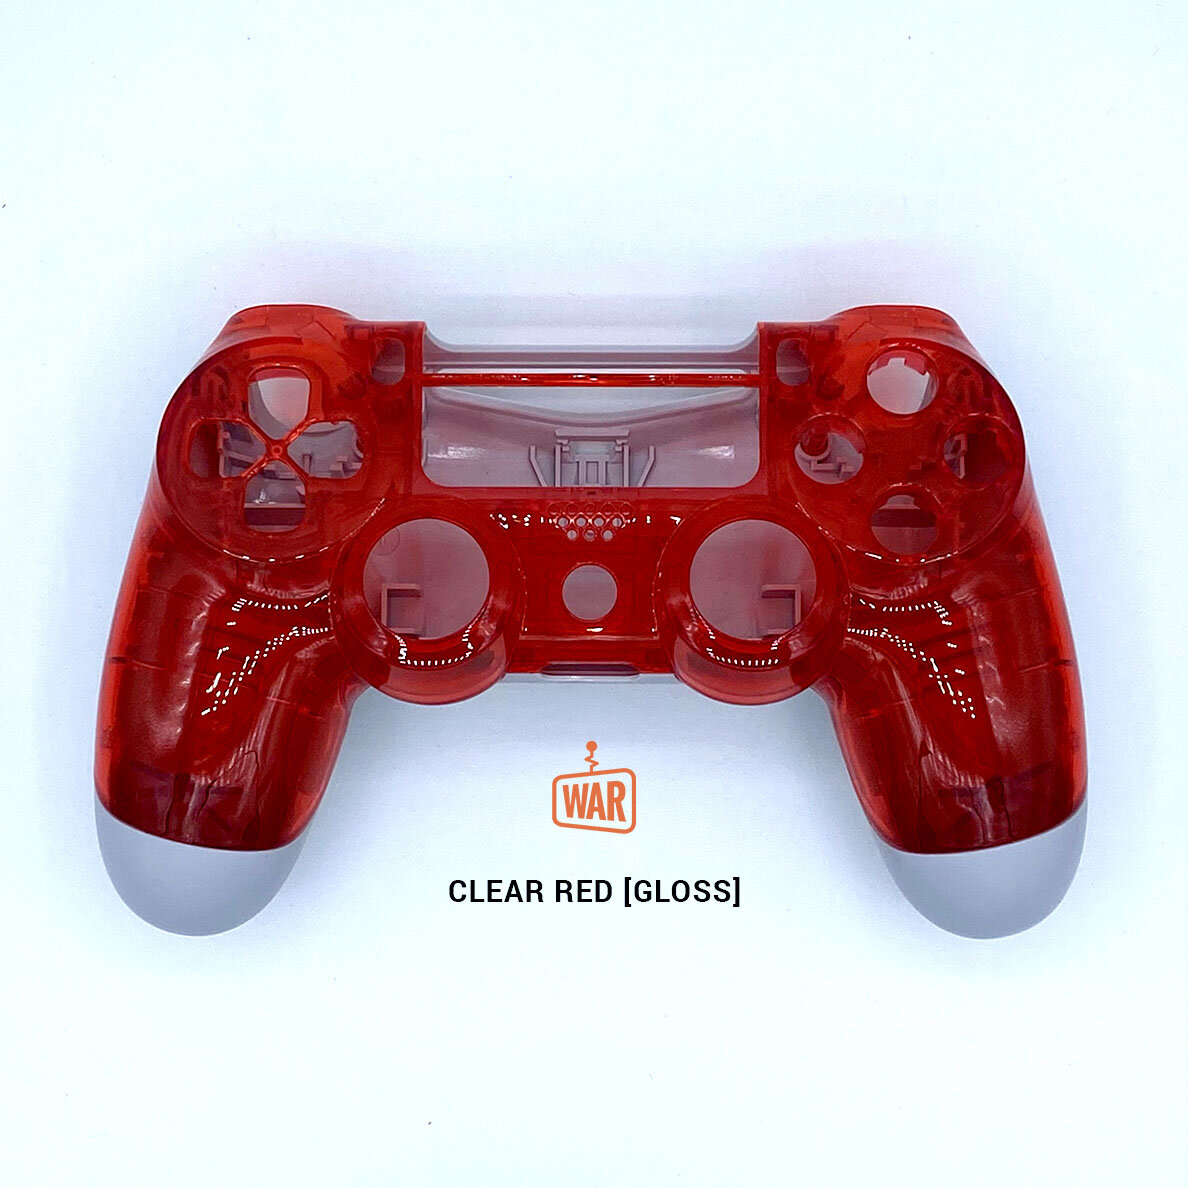 PS4 Shells - All Shells - CLEAR RED.jpg